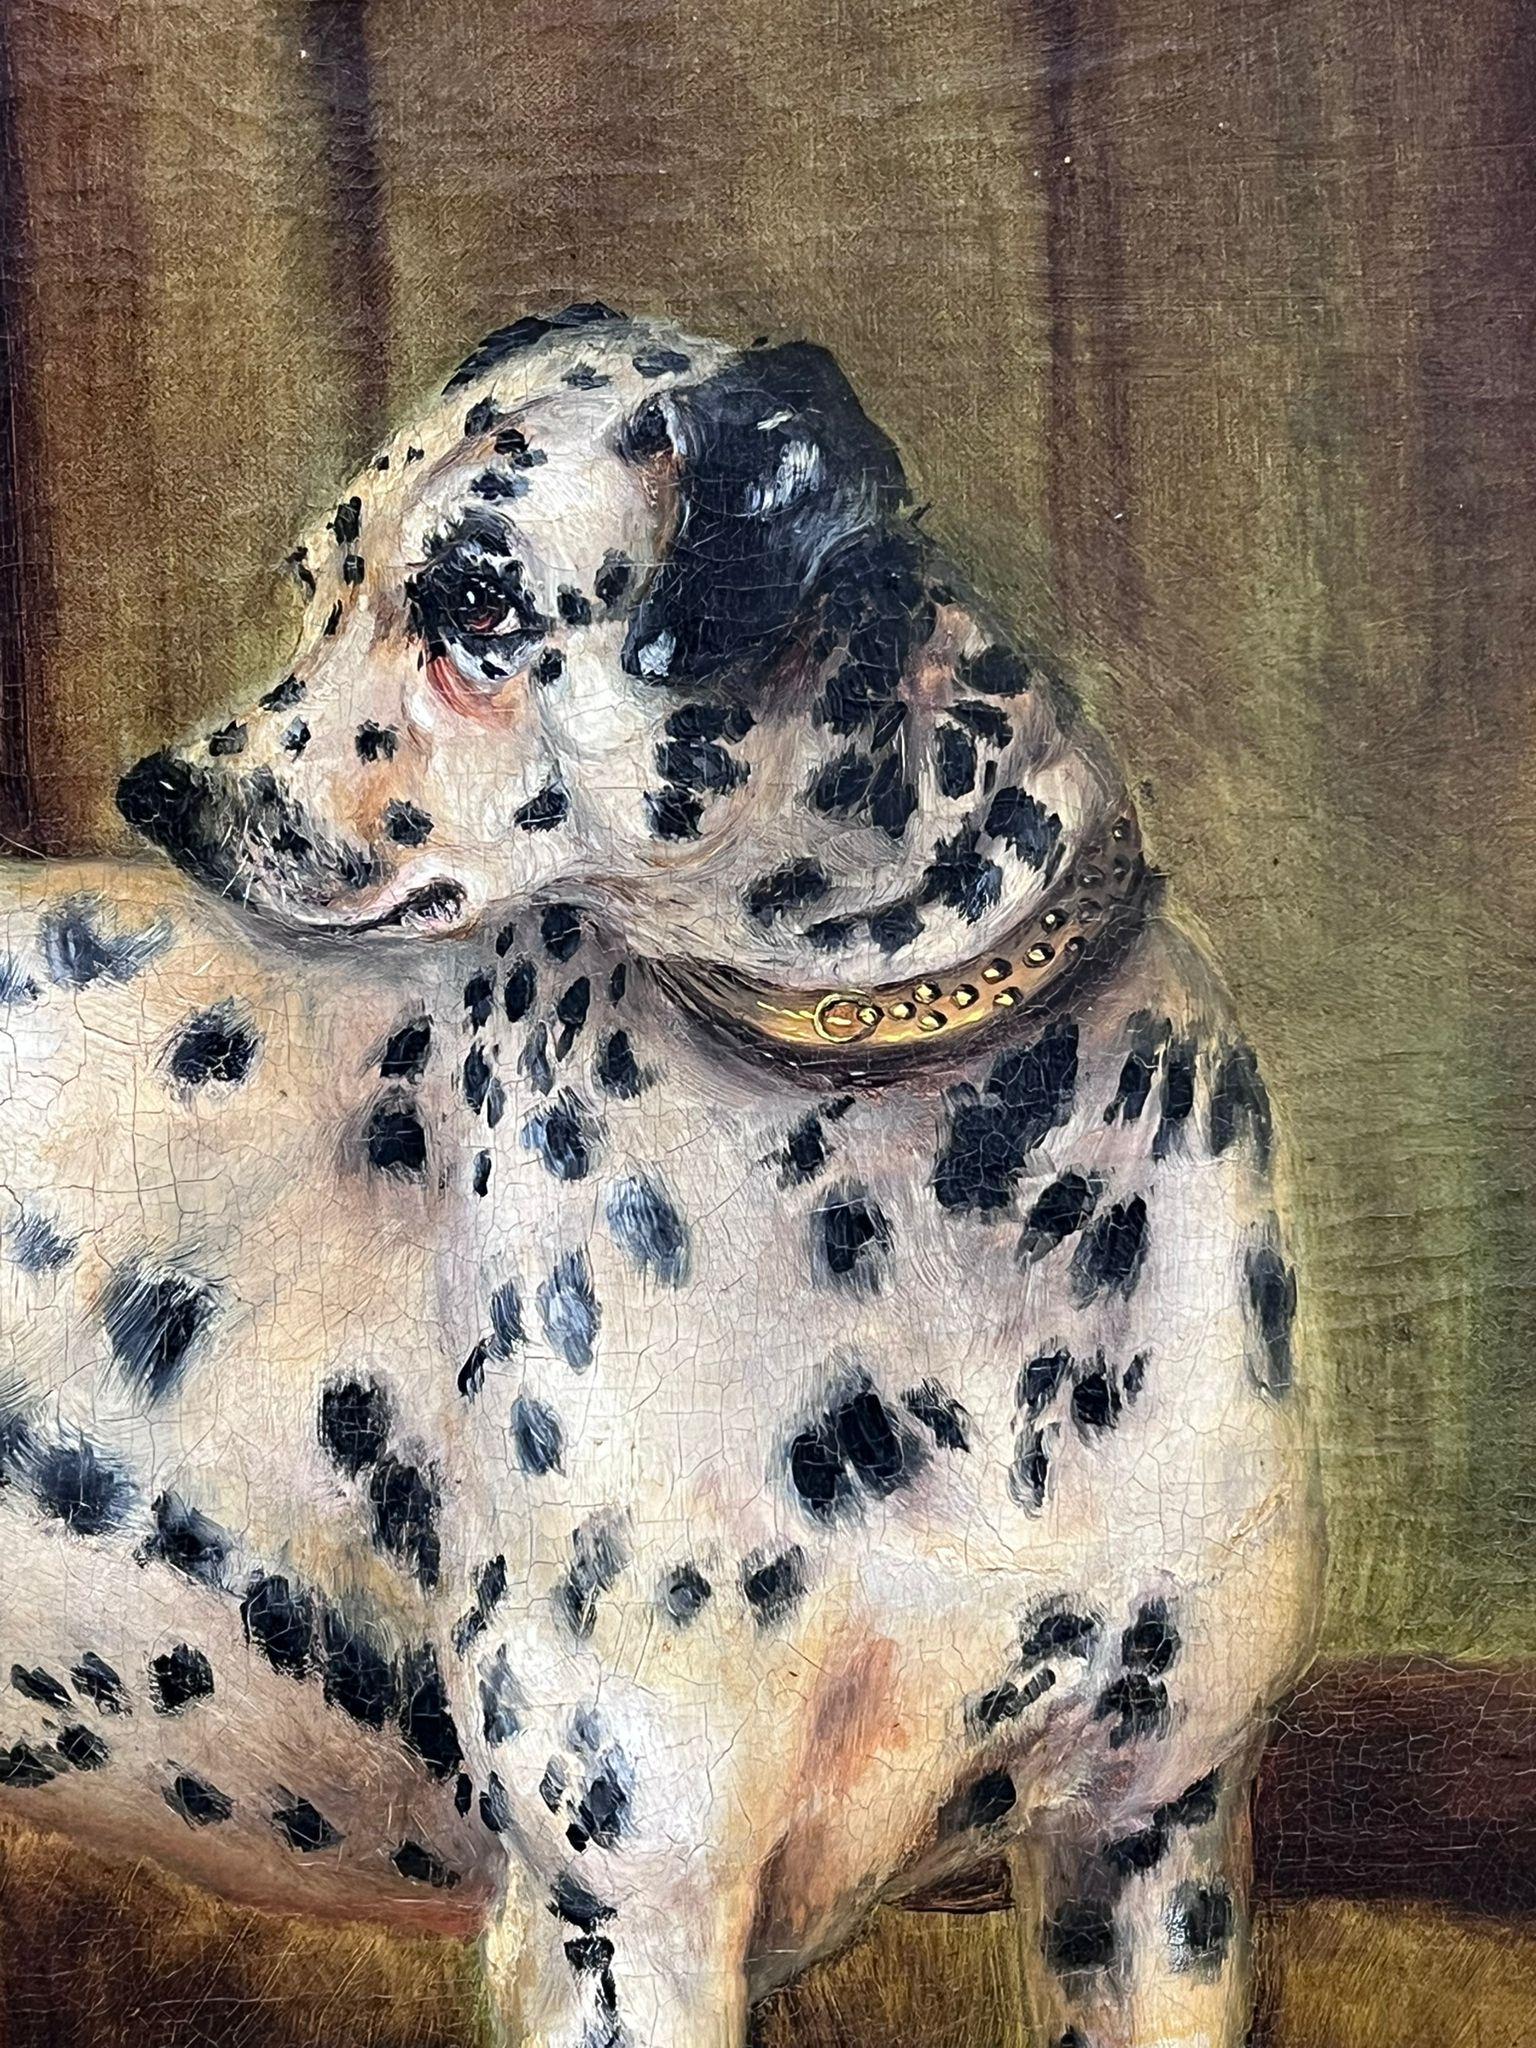 The Dalmatian Dog
by Adrienne Lester, British 1870-1955
signed & dated 1896
oil on canvas, framed
framed: 27 x 32.5 inches
canvas: 25 x 30 inches
provenance: private collection
condition: very good and sound condition; please note the frame is